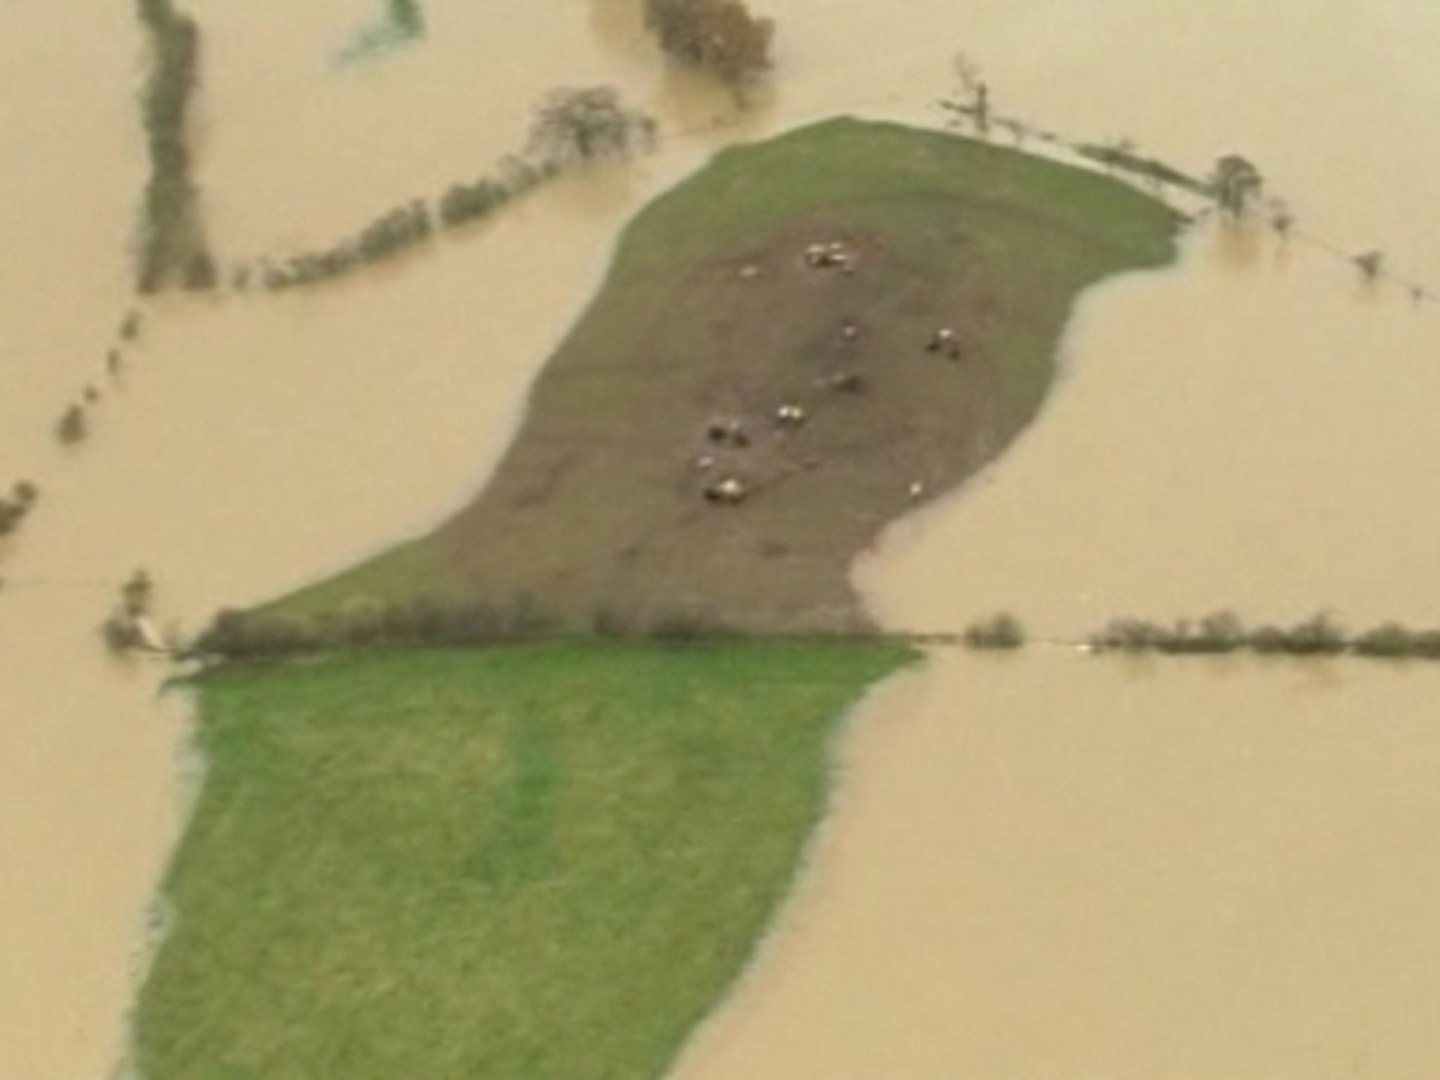 Flooding continues in UK